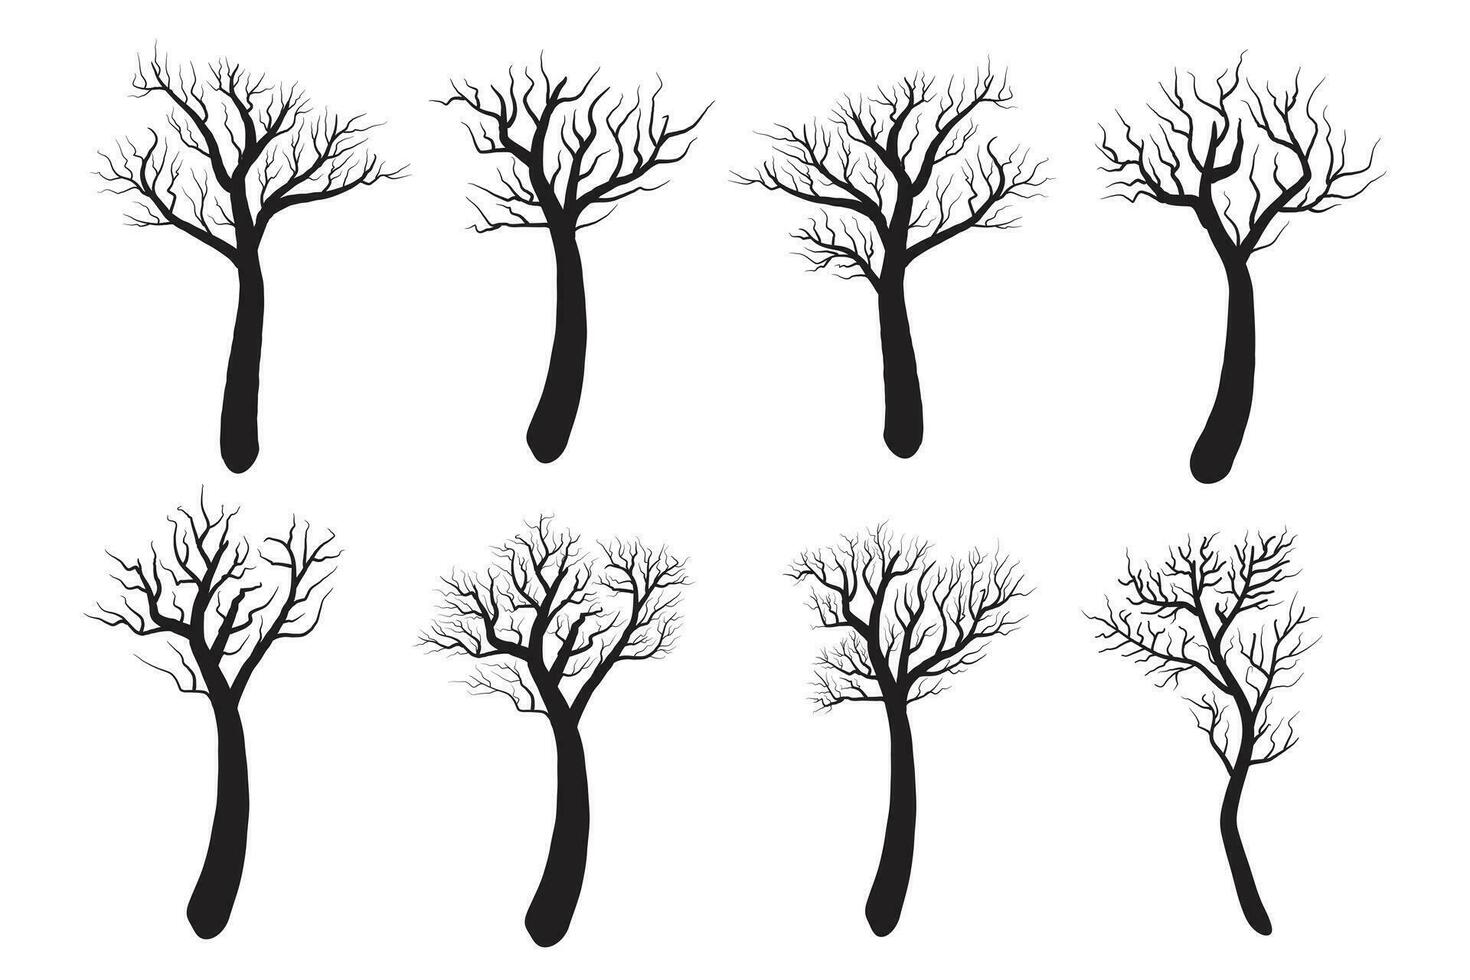 set of hand drawn Halloween dry, dead, spooky, scary tree vector silhouette, Halloween creepy old dry No leaves svg clipart, Winter Naked Black Branch bare branches trees silhouettes vector elements